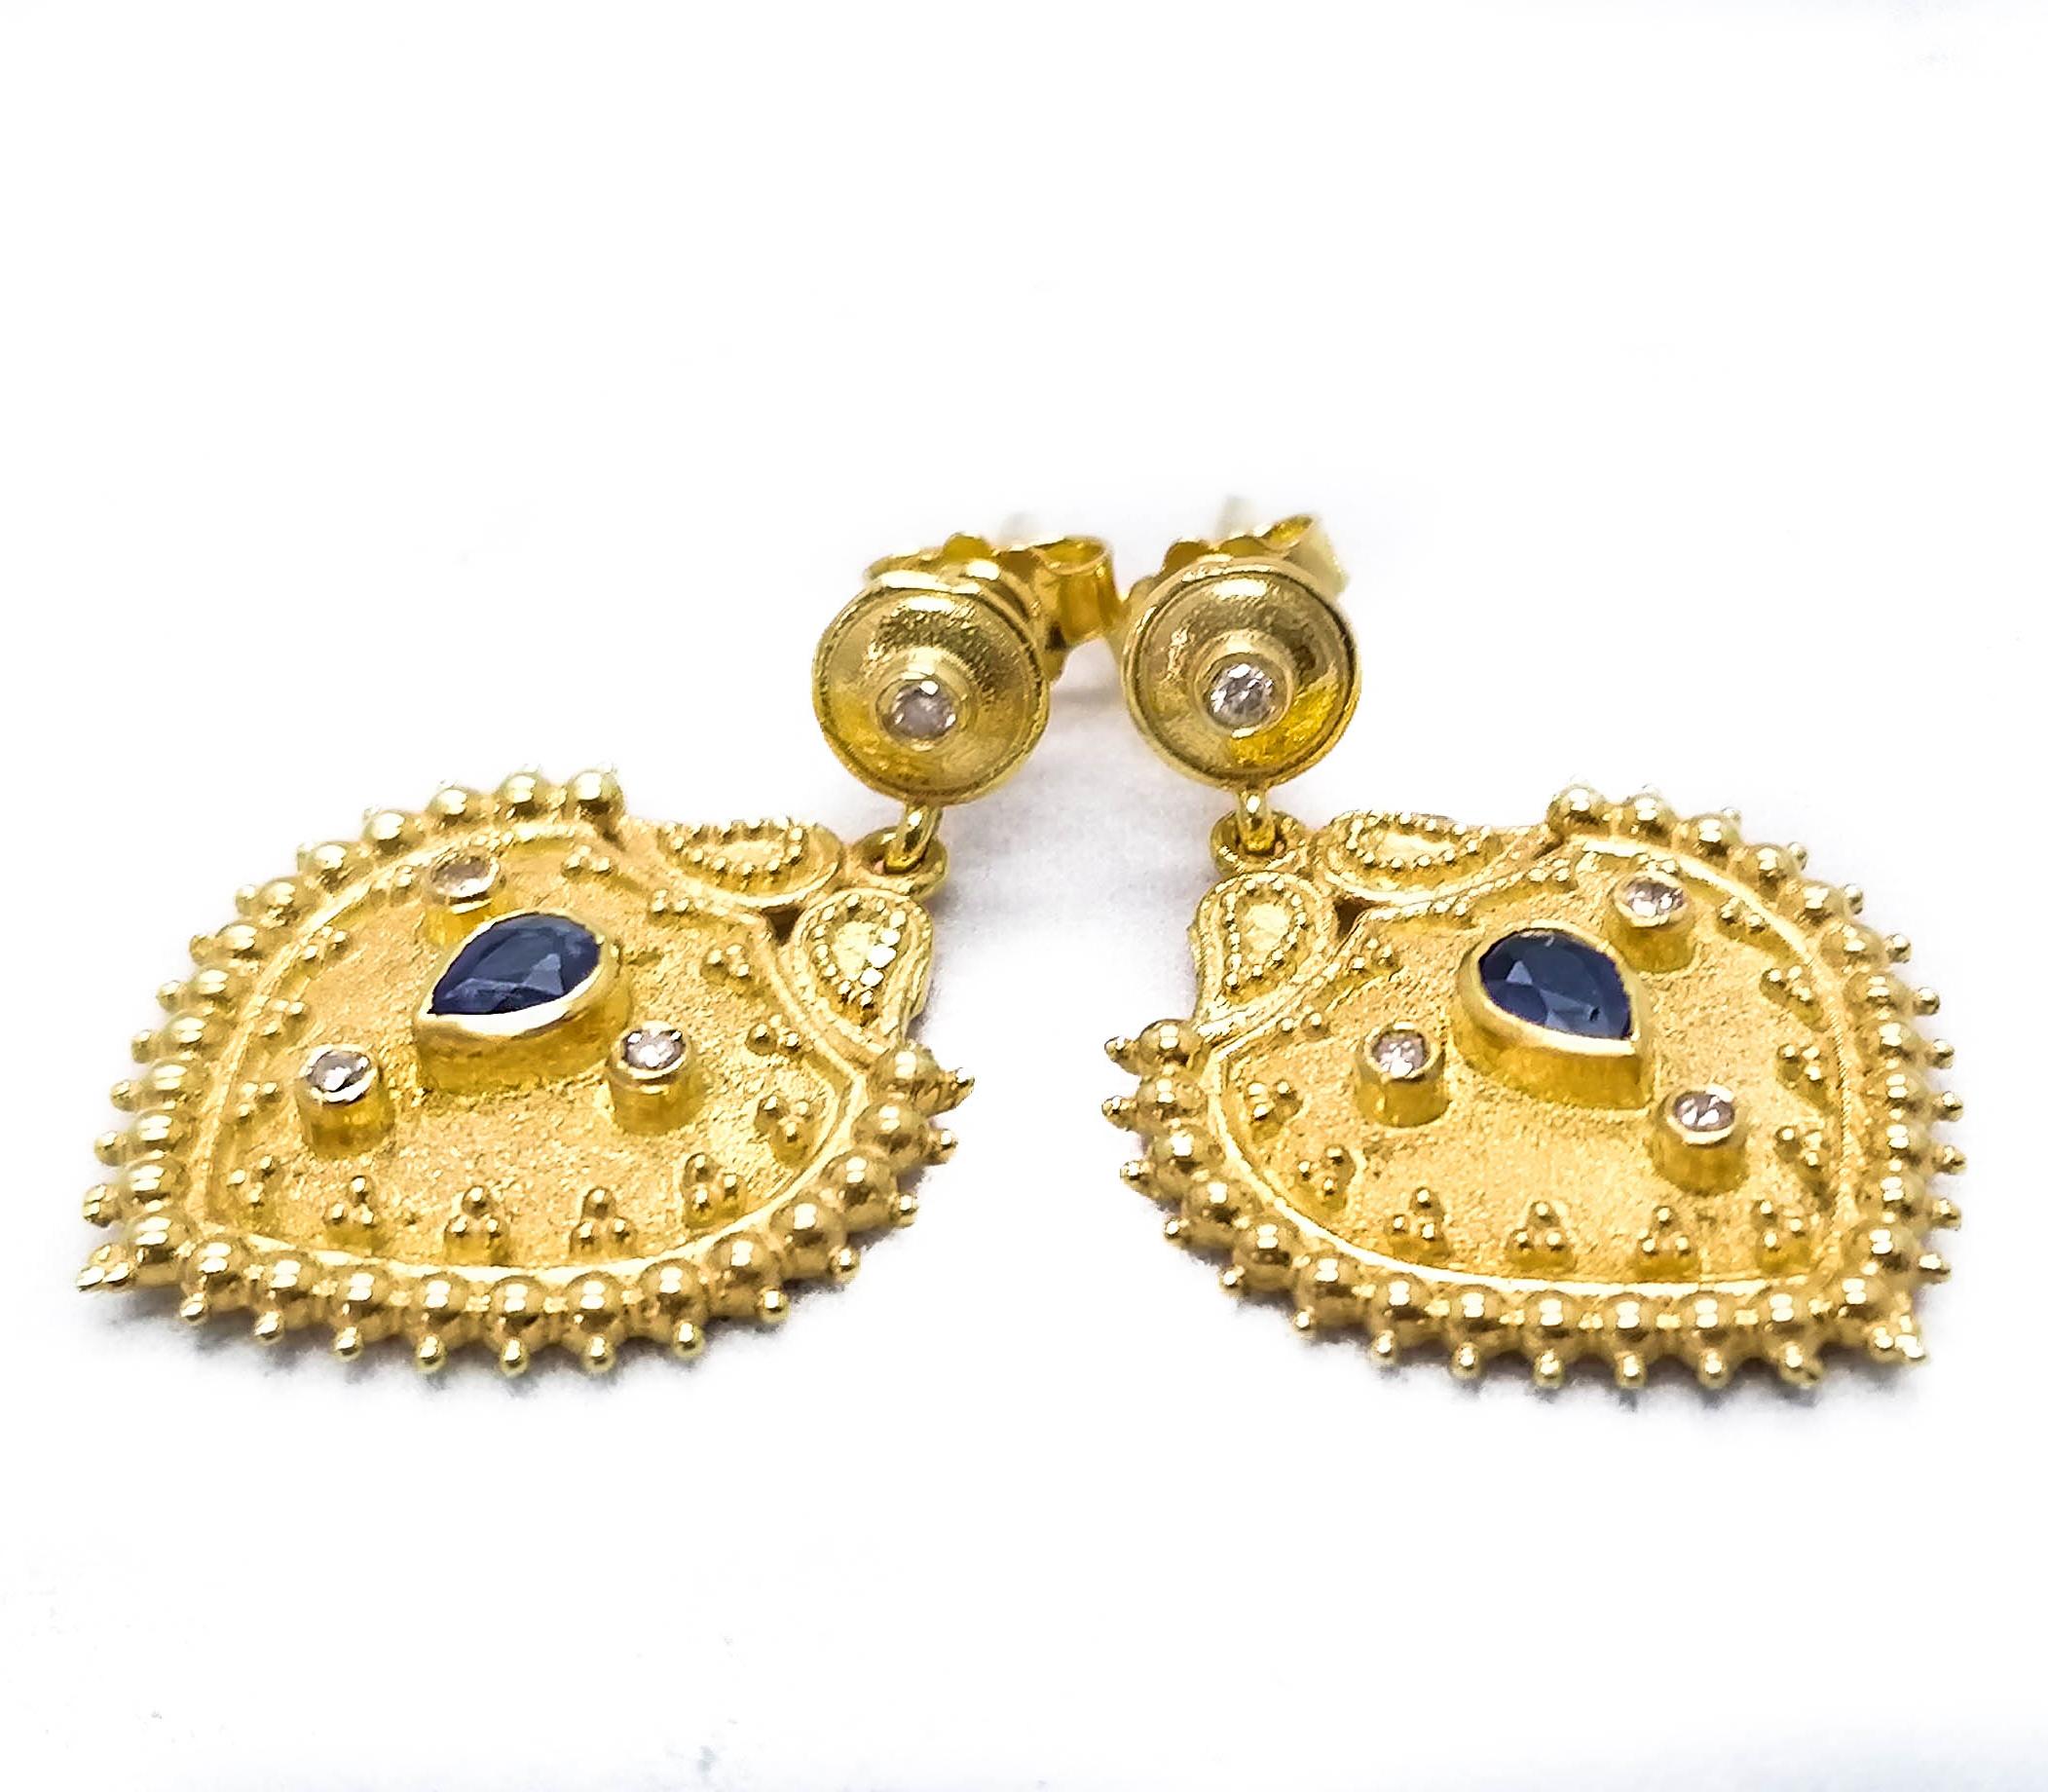 These S.Georgios 18 Karat Yellow Gold designer earrings are decorated with hand made Byzantine-era style bead granulation workmanship, and finished with a unique velvet background. These beautiful earrings feature 2 pear shape natural Blue Sapphires